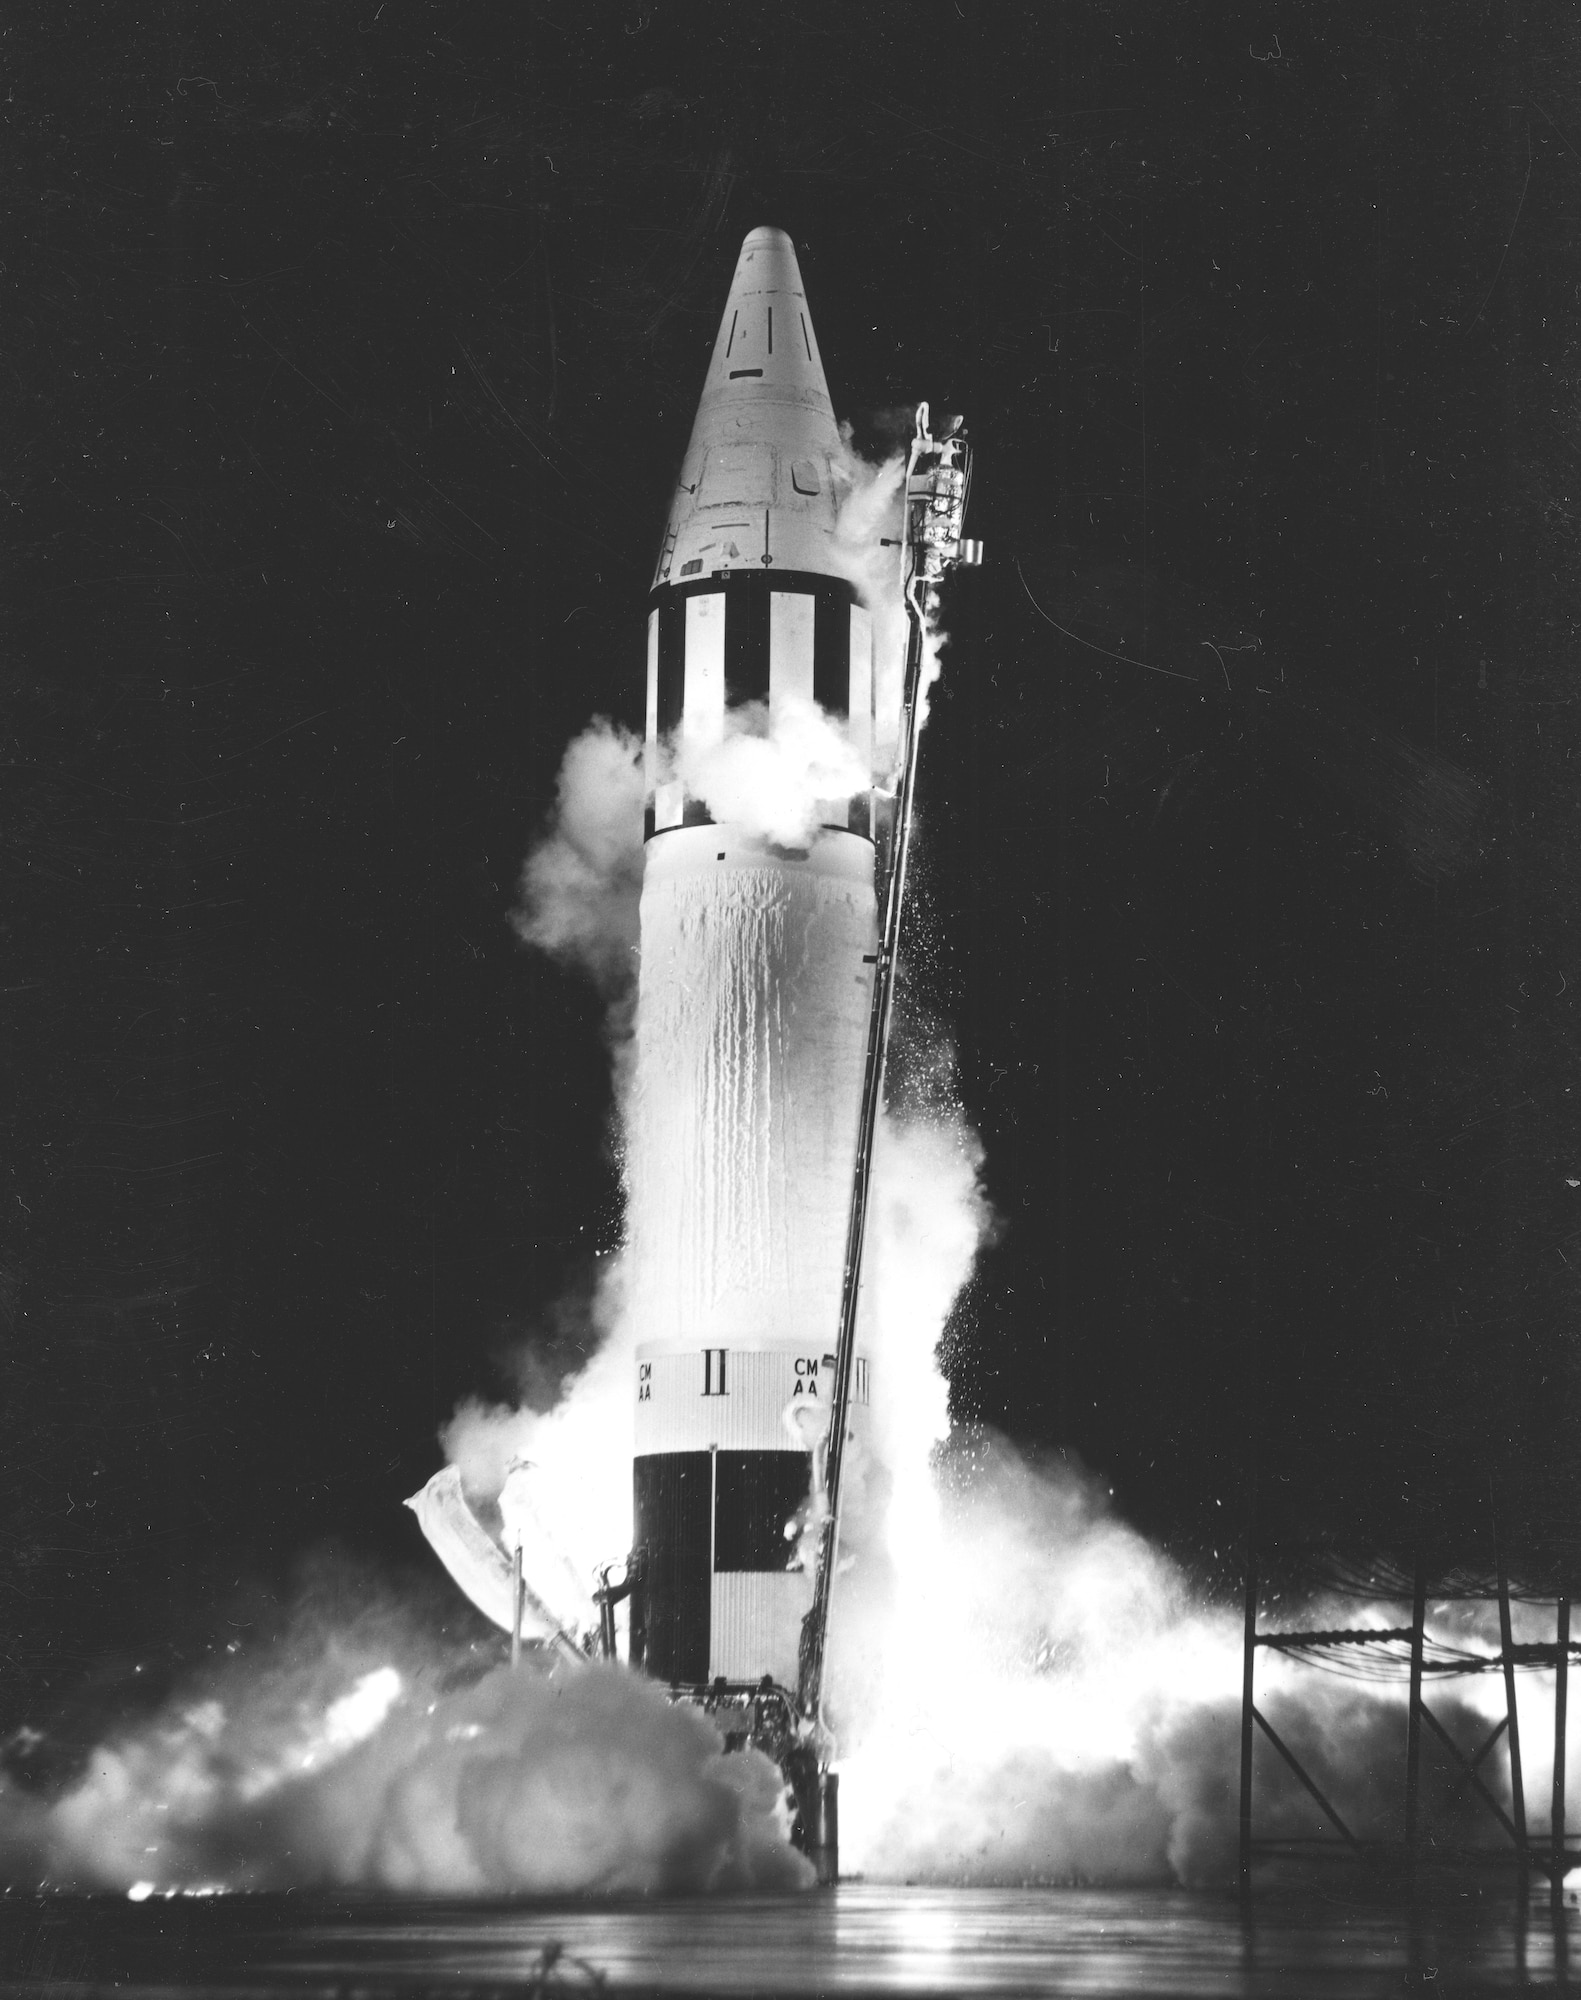 Black and white image of the Jupiter ballistic missile, white with black stripes across the top, on a black background with fire and smoke billowing up from the bottom as it takes off.